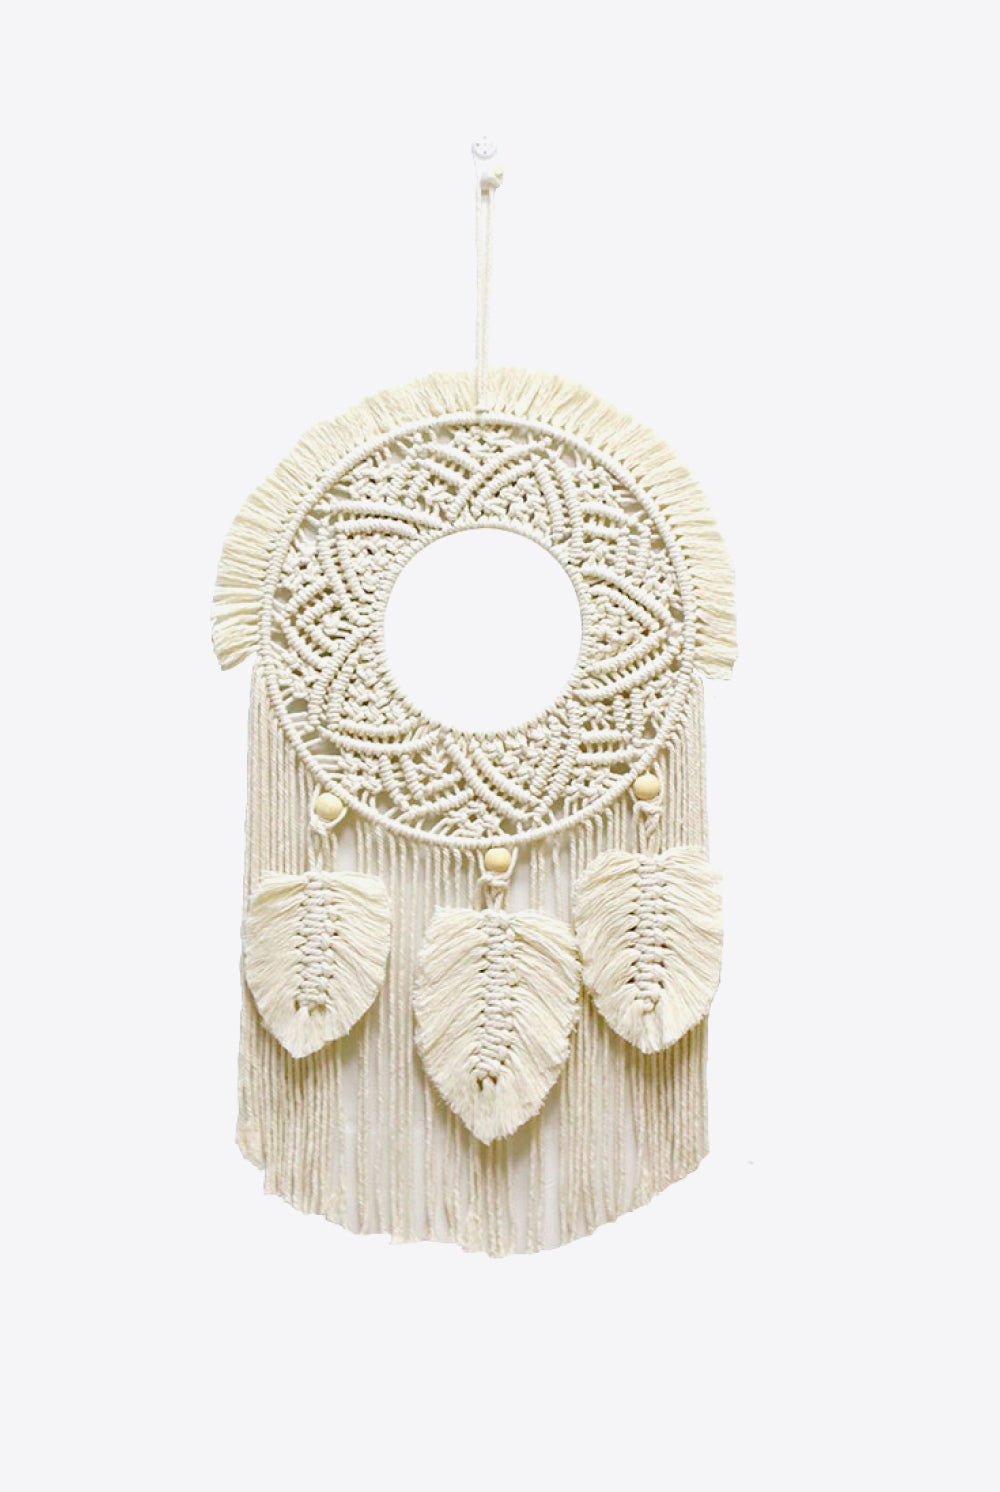 White Smoke All About The Vibe Hand-Woven Fringe Macrame Wall Hanging Home